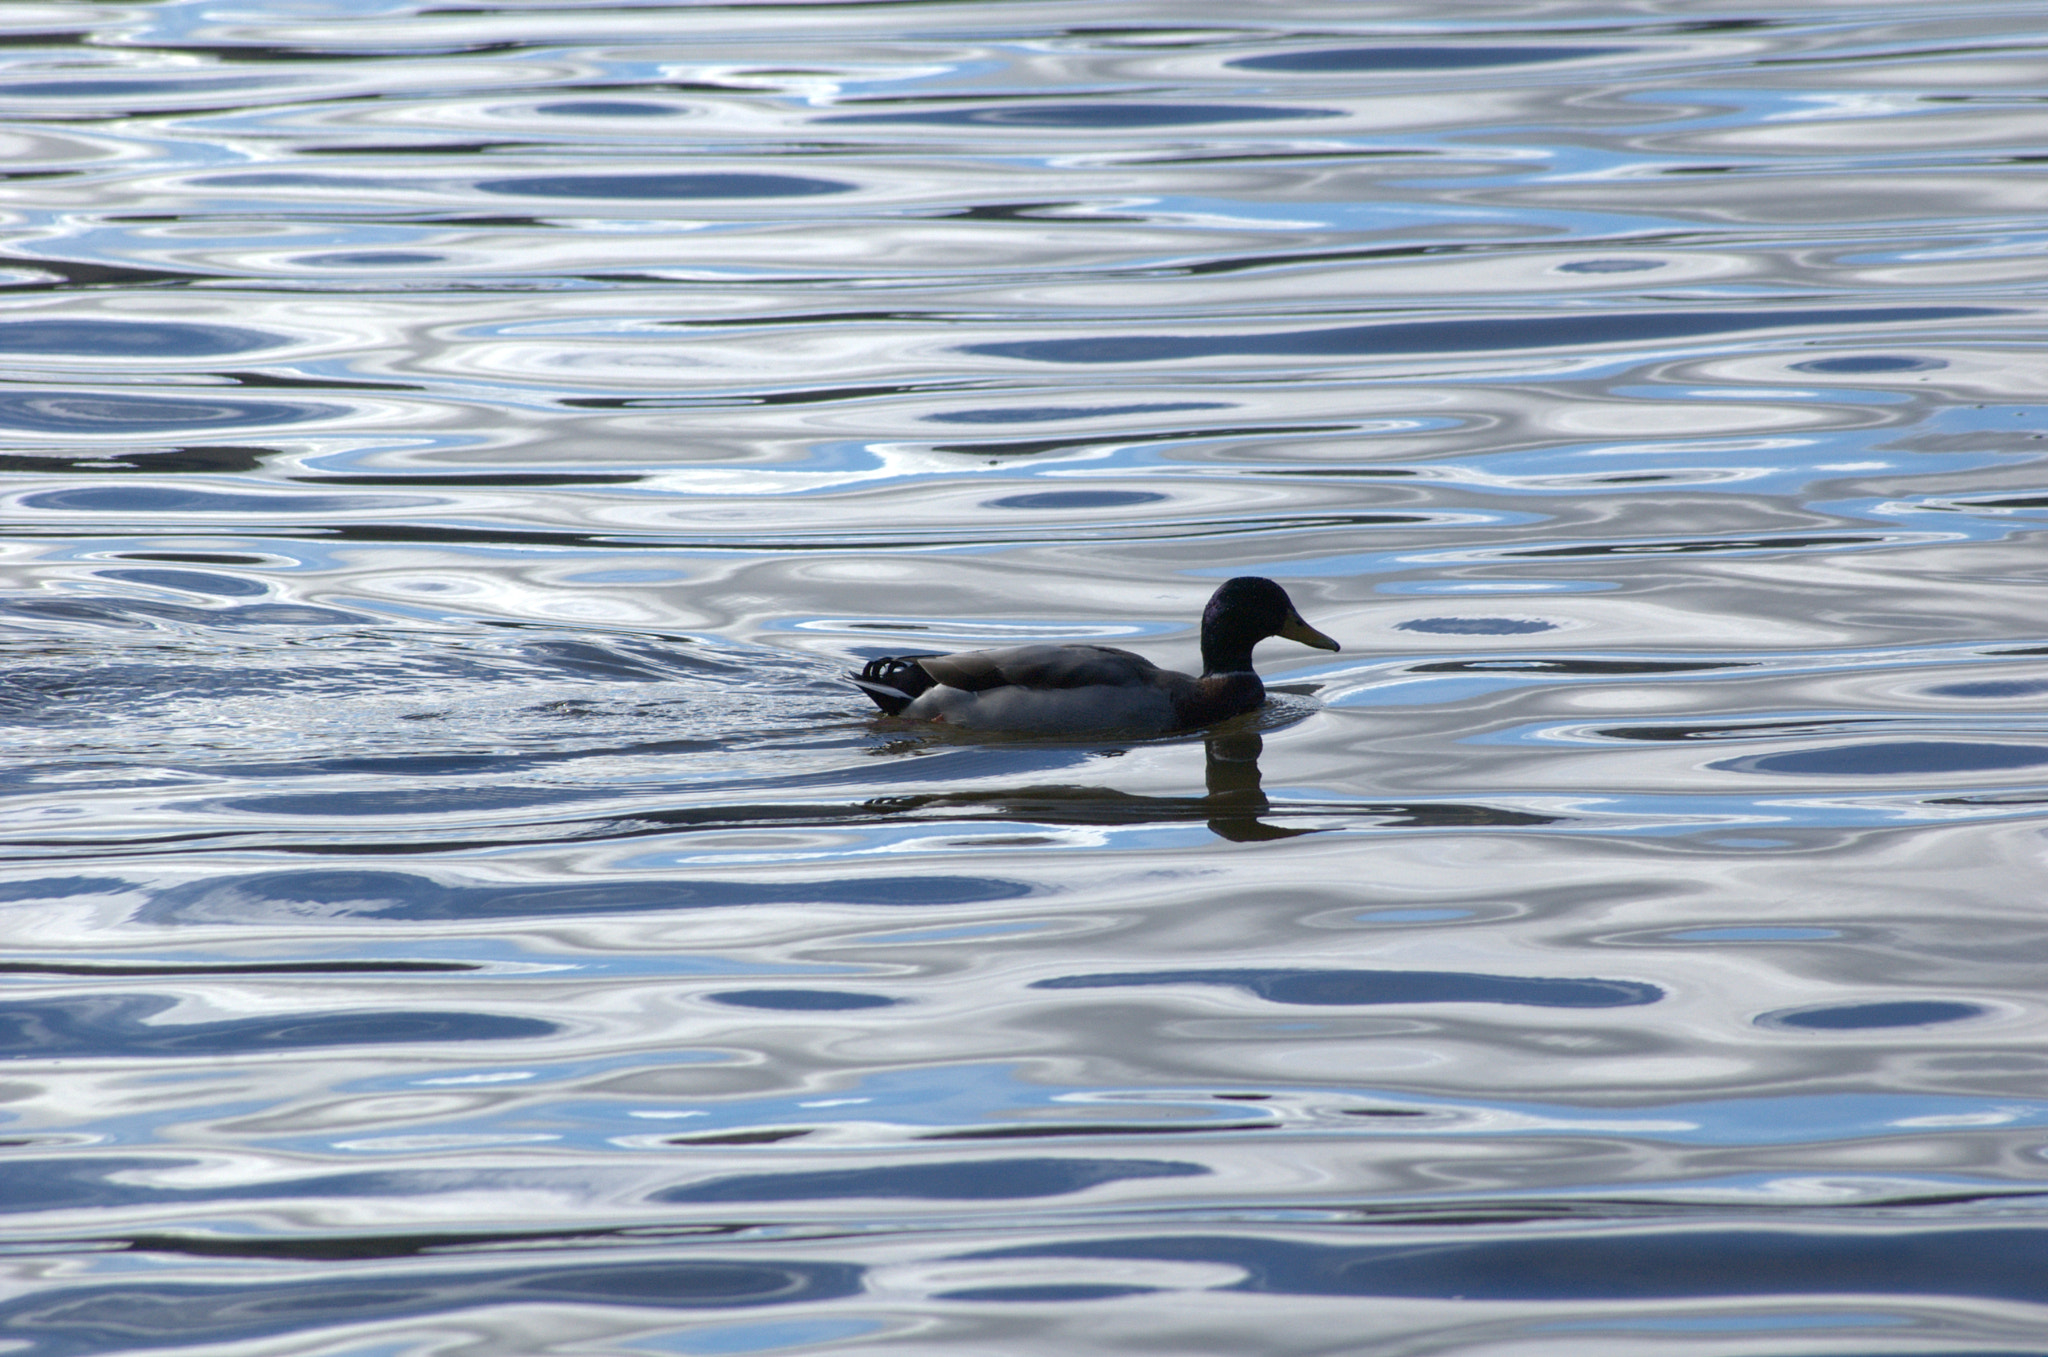 Nikon D70 sample photo. Duck swimming on loch tay, perthshire scotland photography